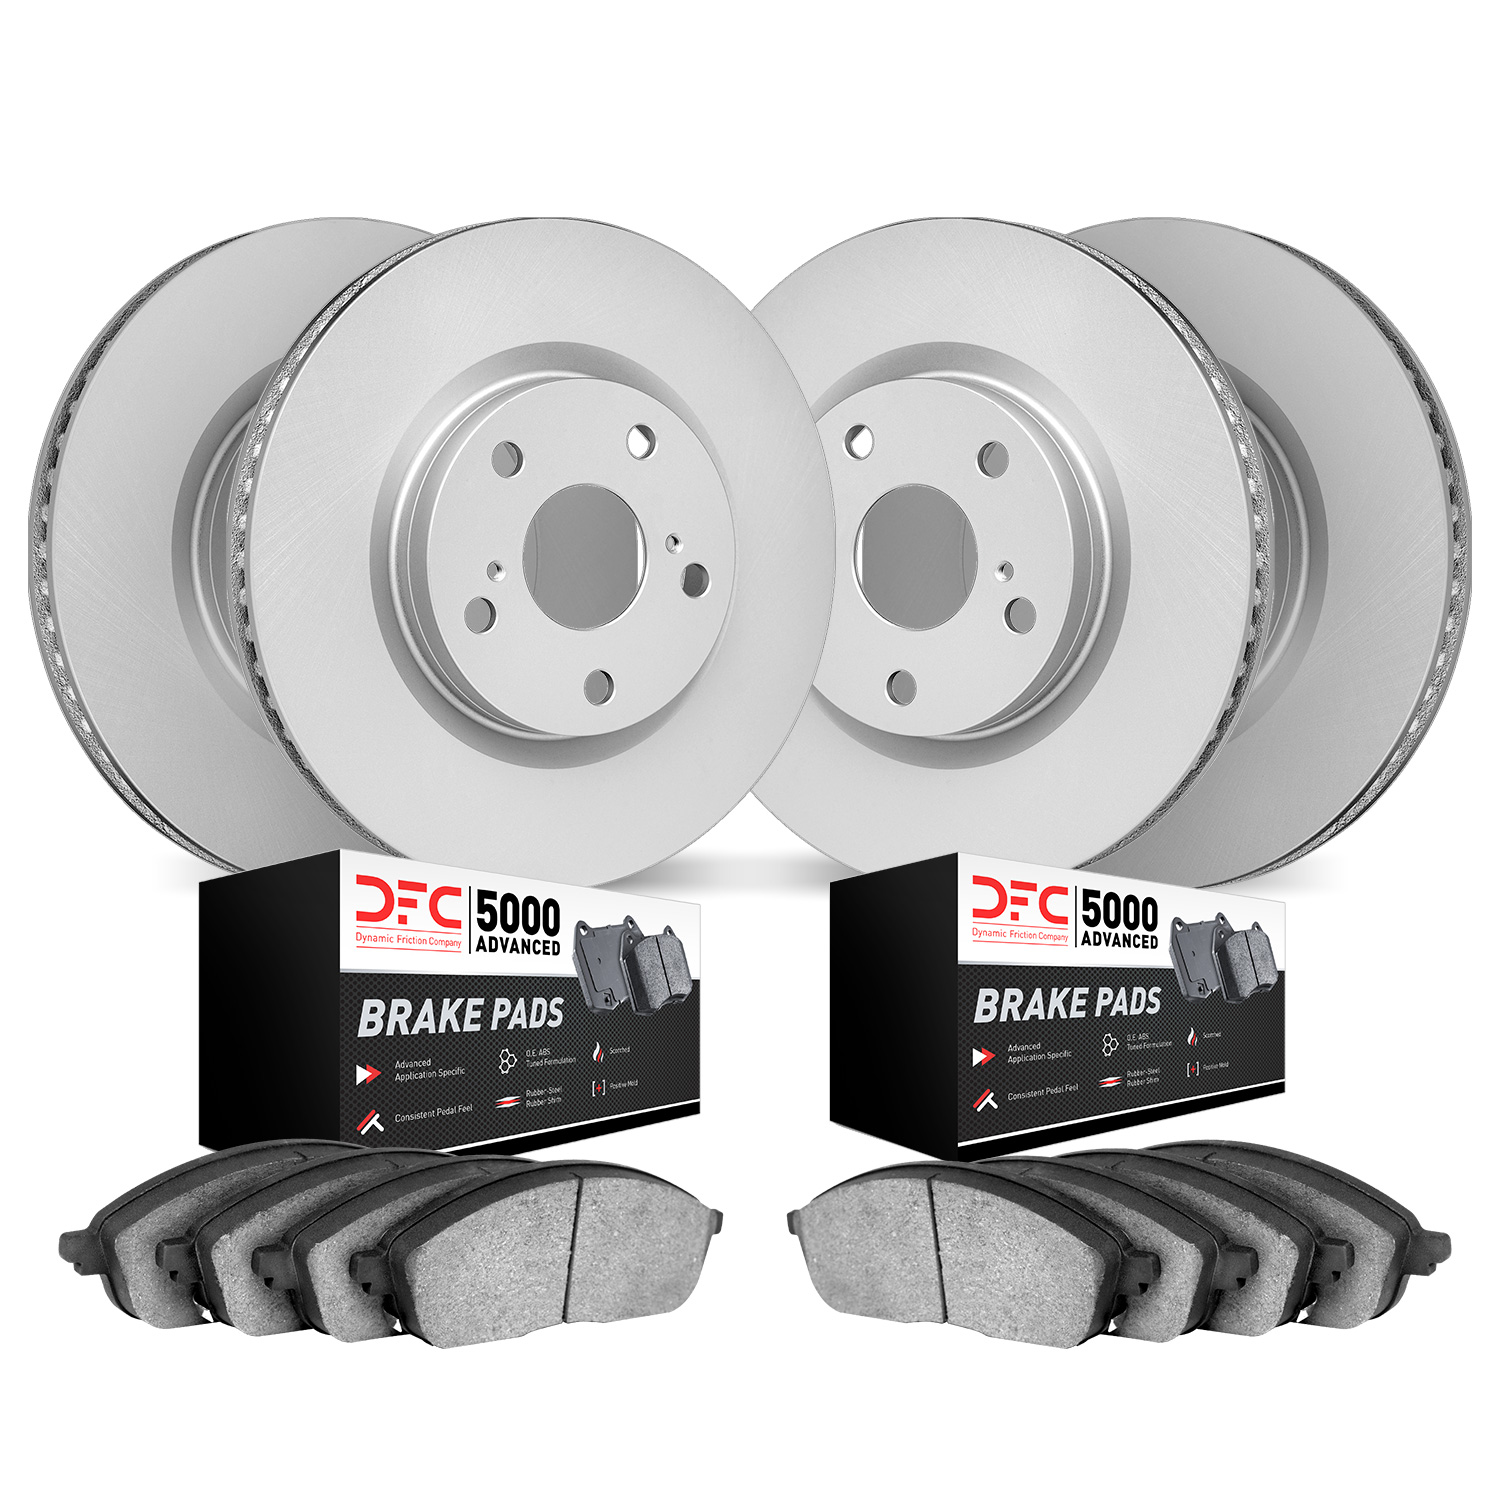 4504-54292 Geospec Brake Rotors w/5000 Advanced Brake Pads Kit, Fits Select Ford/Lincoln/Mercury/Mazda, Position: Front and Rear